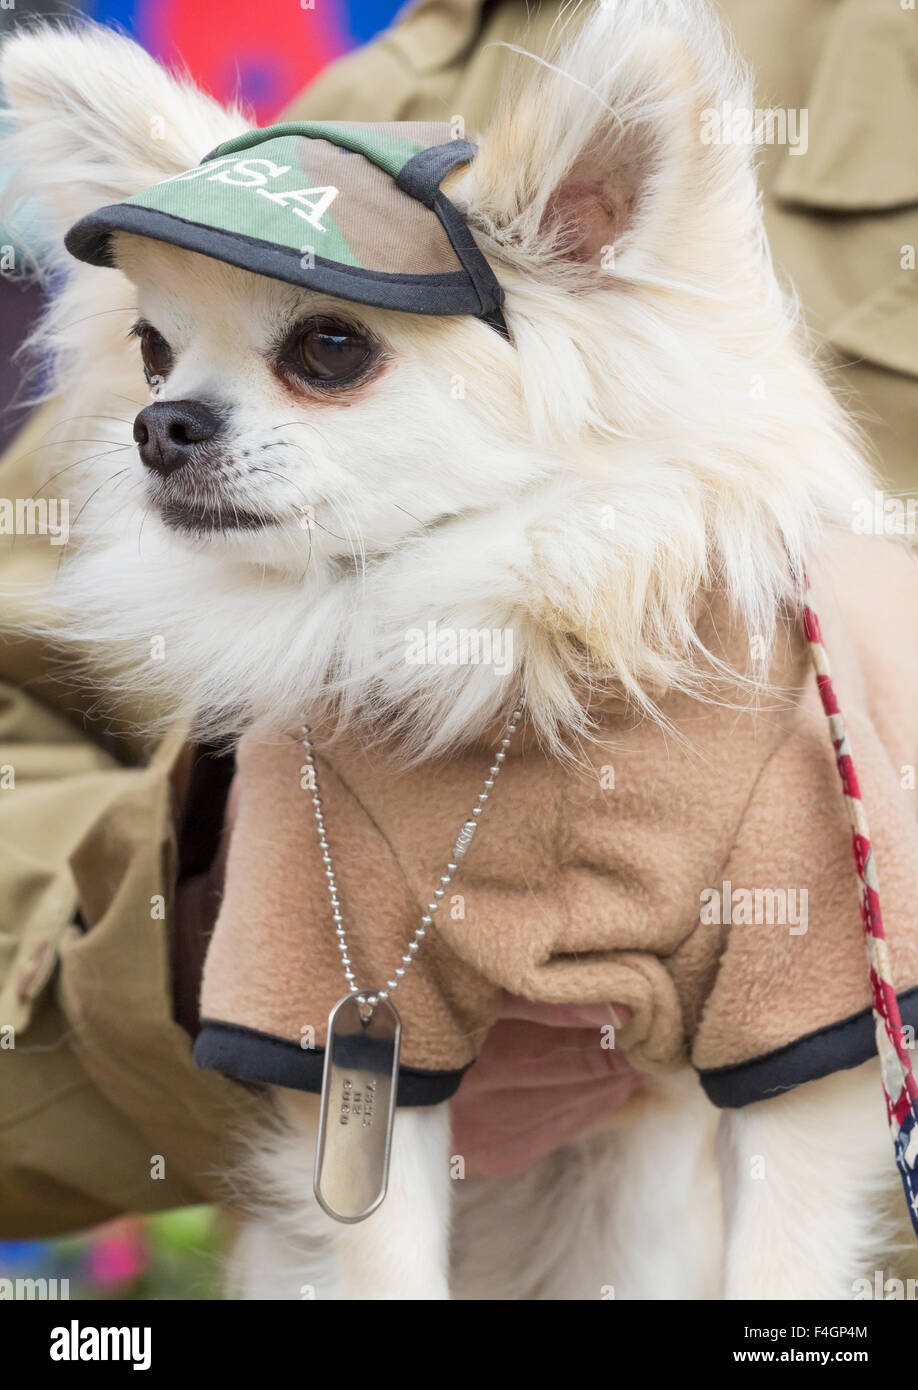 Pickering, North Yorkshire, UK. 17th October, 2015. Pickering`s annual Wartime and 40`s Weekend attracts thousands, with World War 2 living history camps and battle re-enactments amomg the attractions. PICTURED: Man dressed as American soldier with pet Chihuahua also in  uniform and wearing military Dog tag. Stock Photo